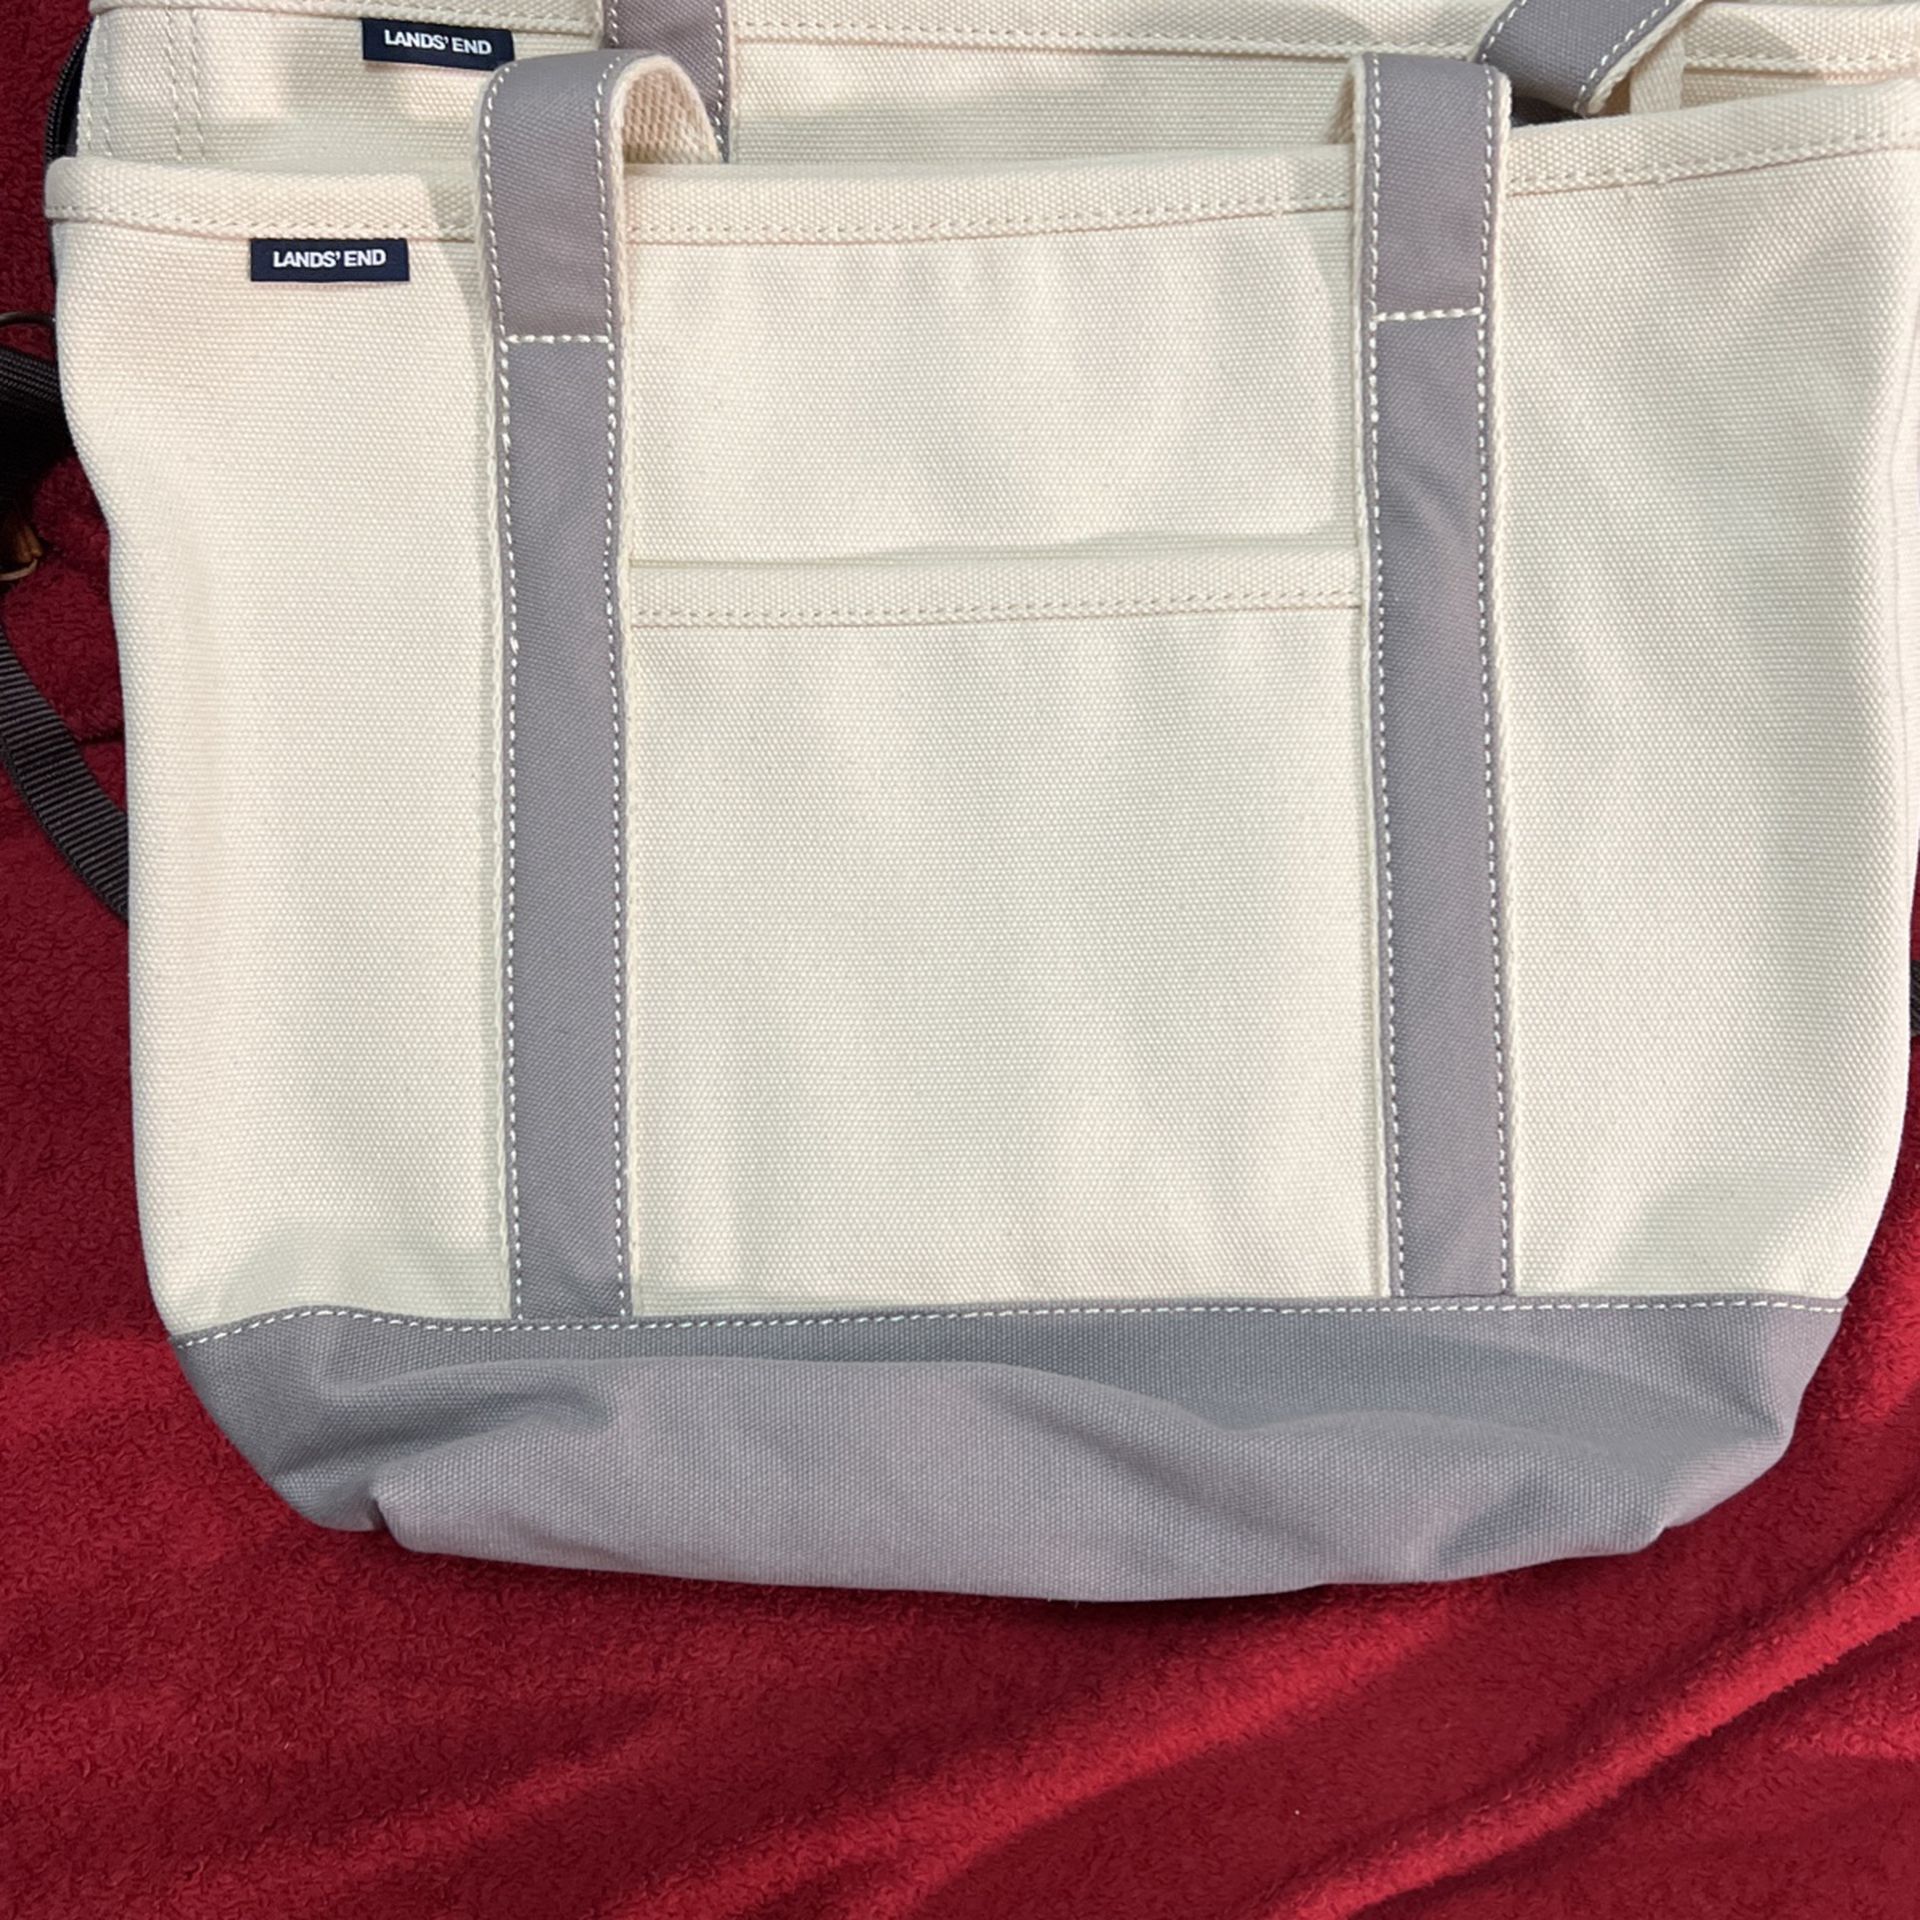 Two Lands End Bags for Sale in Jersey City, NJ - OfferUp